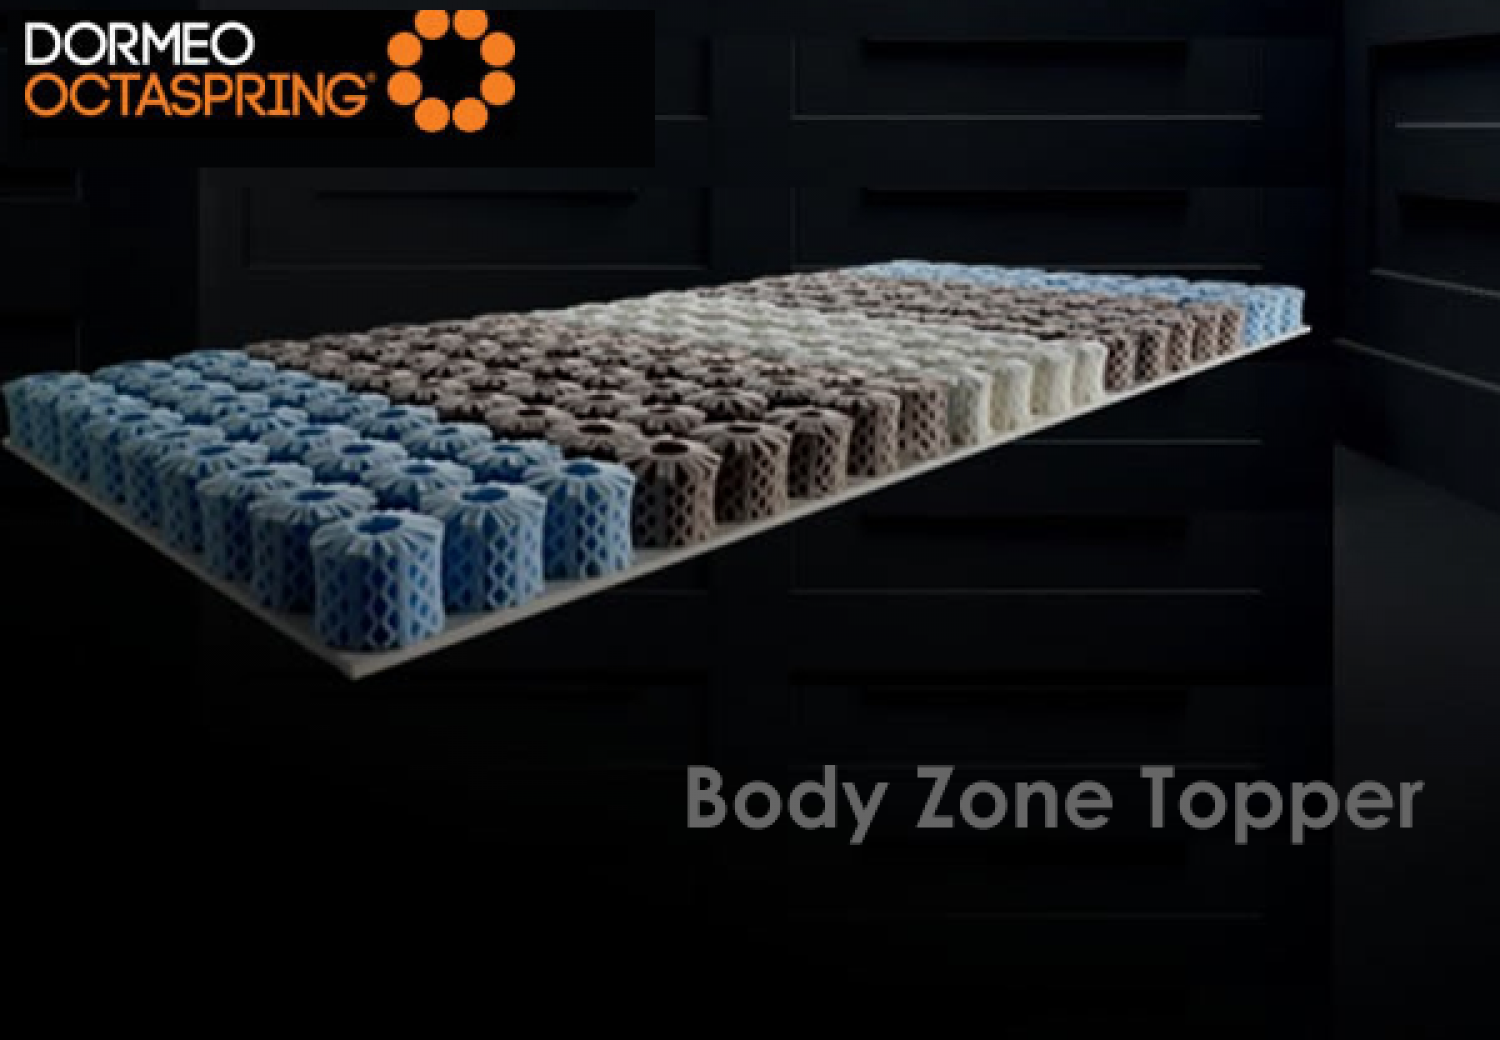 Dormeo Octaspring Body Zoned Topper to keep you cool and comfortable all night, healthy sleep, Beds and Mattresses shop in Fuengirola, best prices. Shop online image